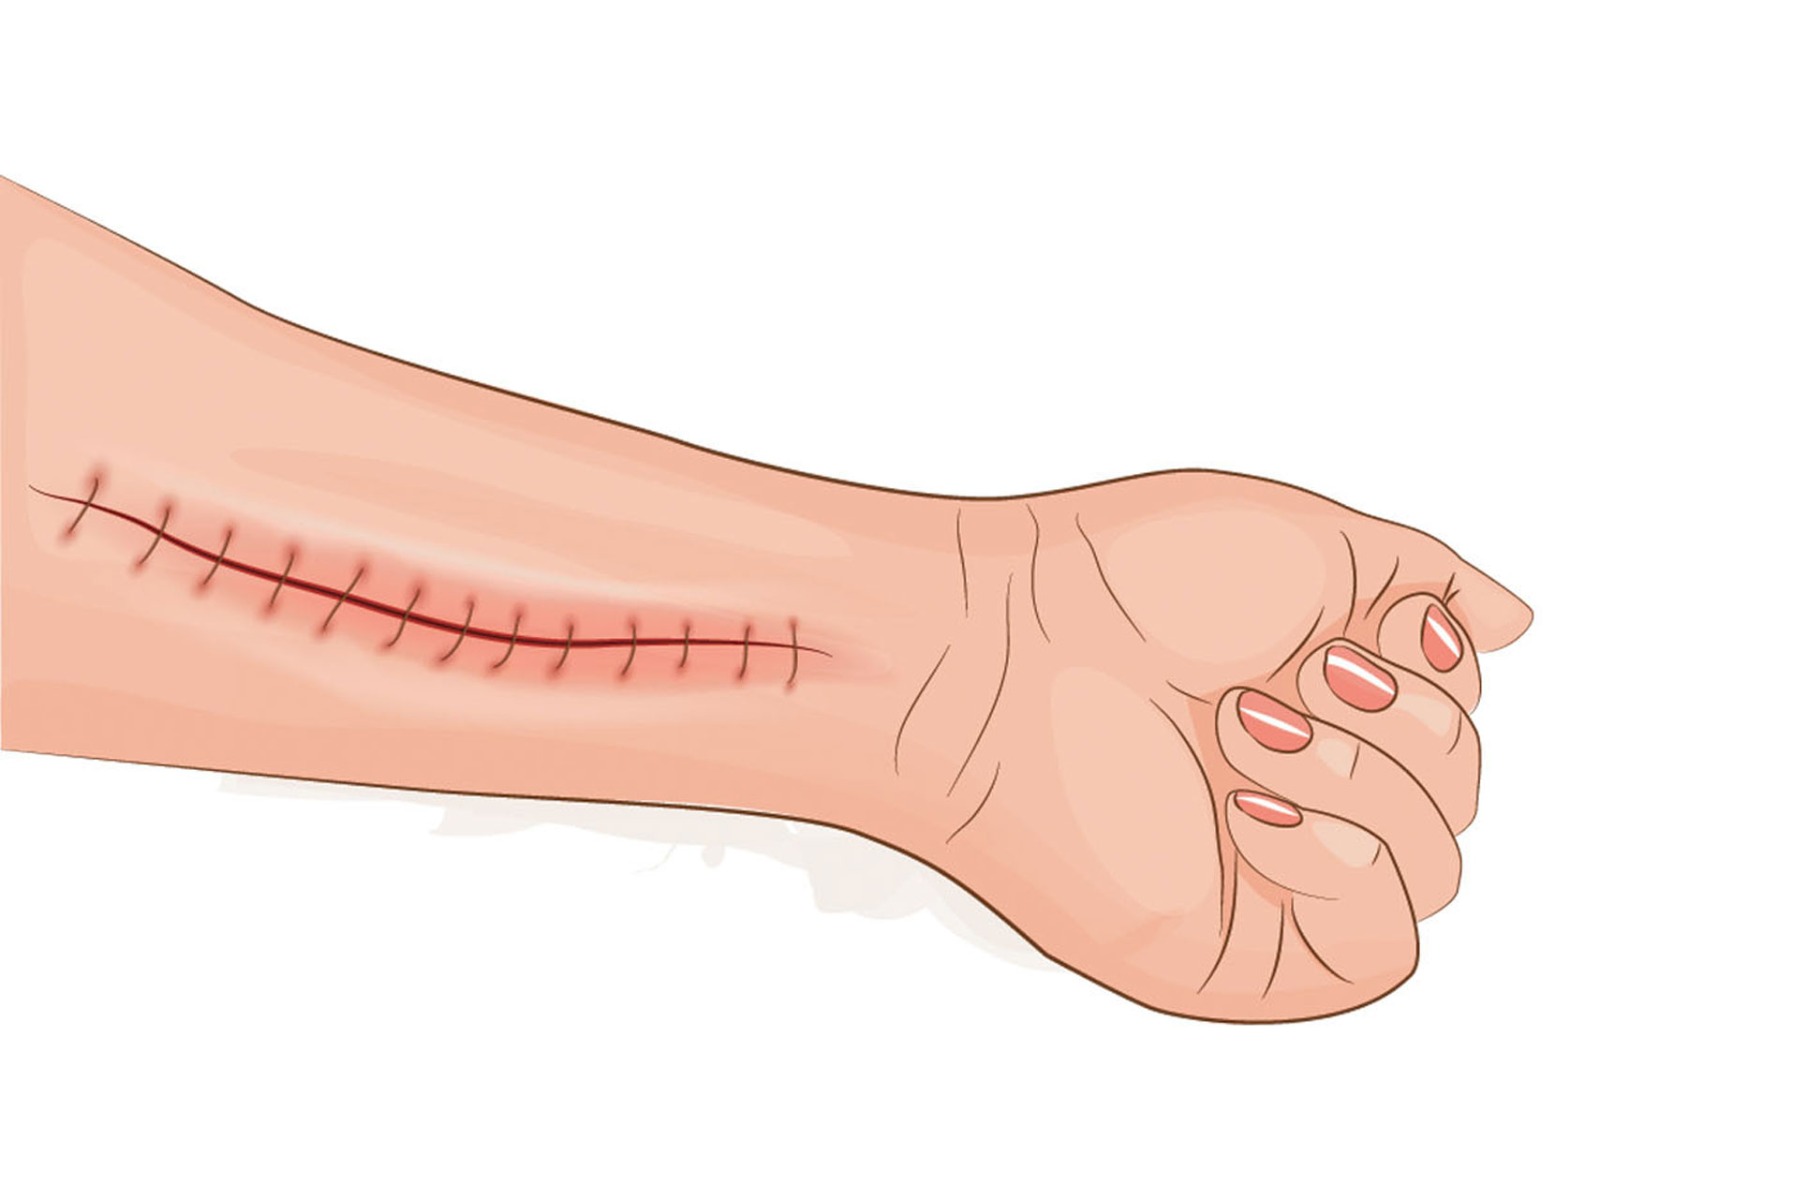 Arm with stitches wound illustration